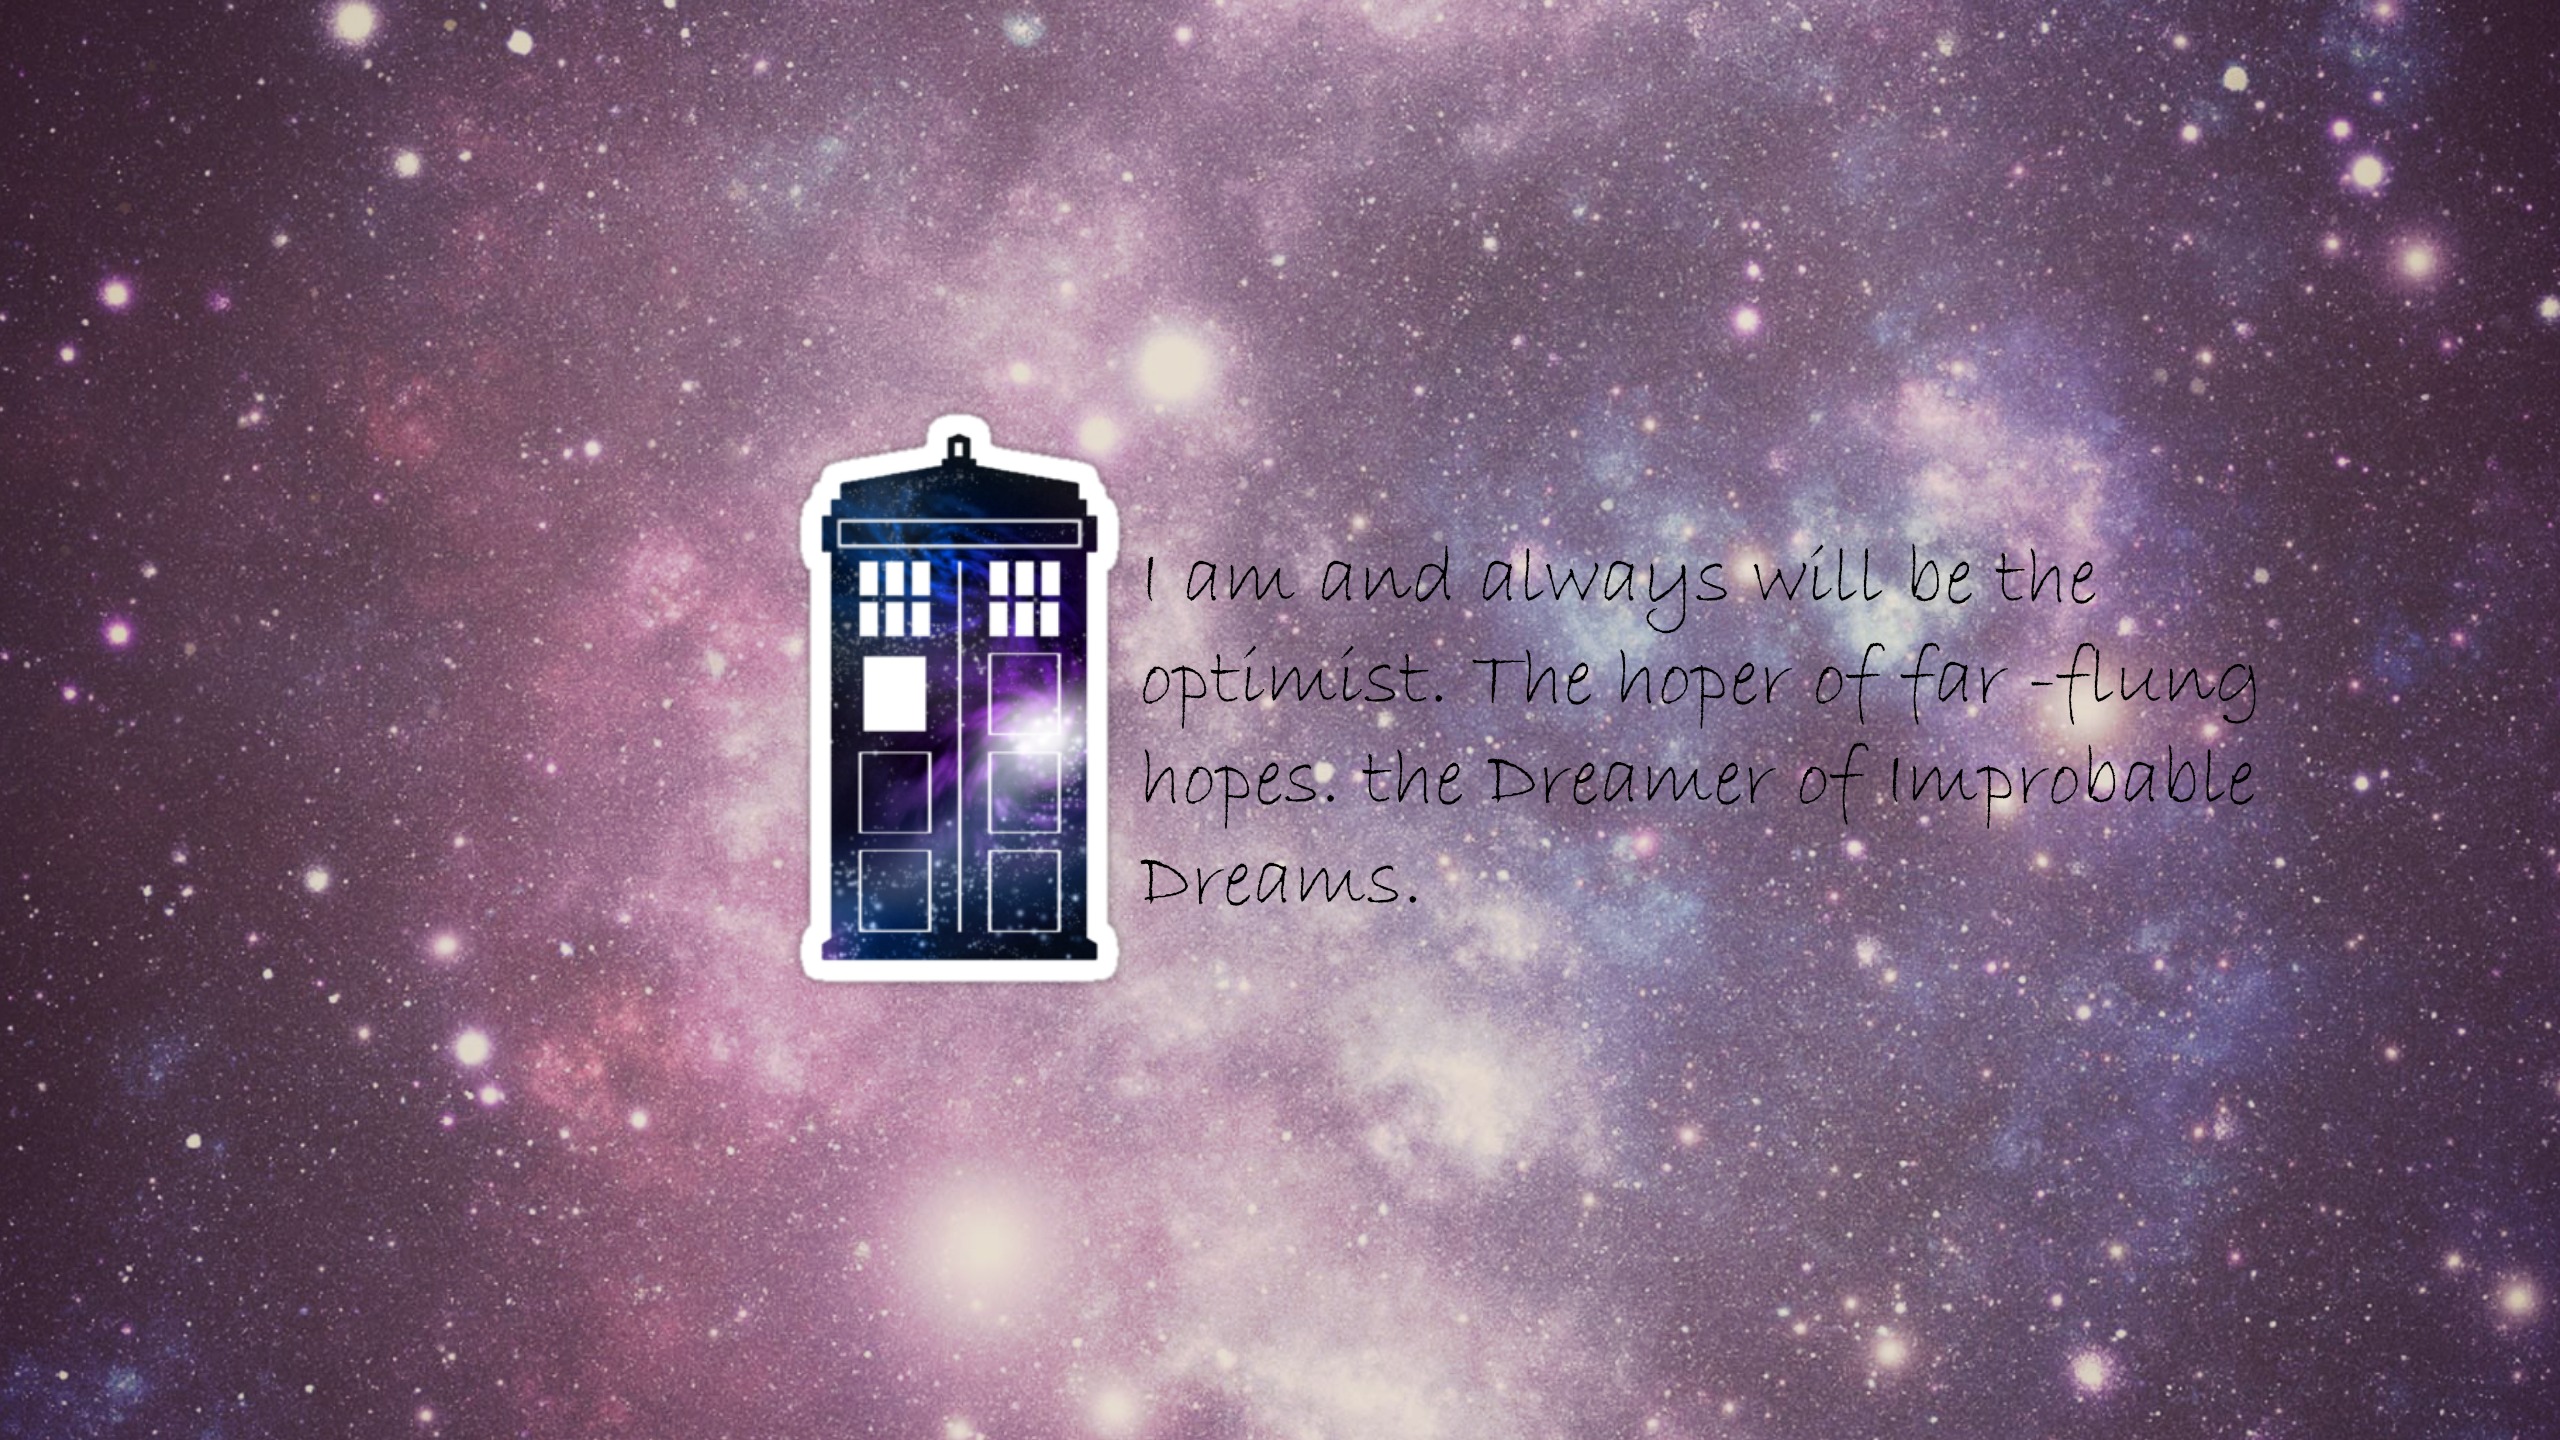 Doctor Who Wallpaper Awesome B2X » WALLPAPERUN.COM